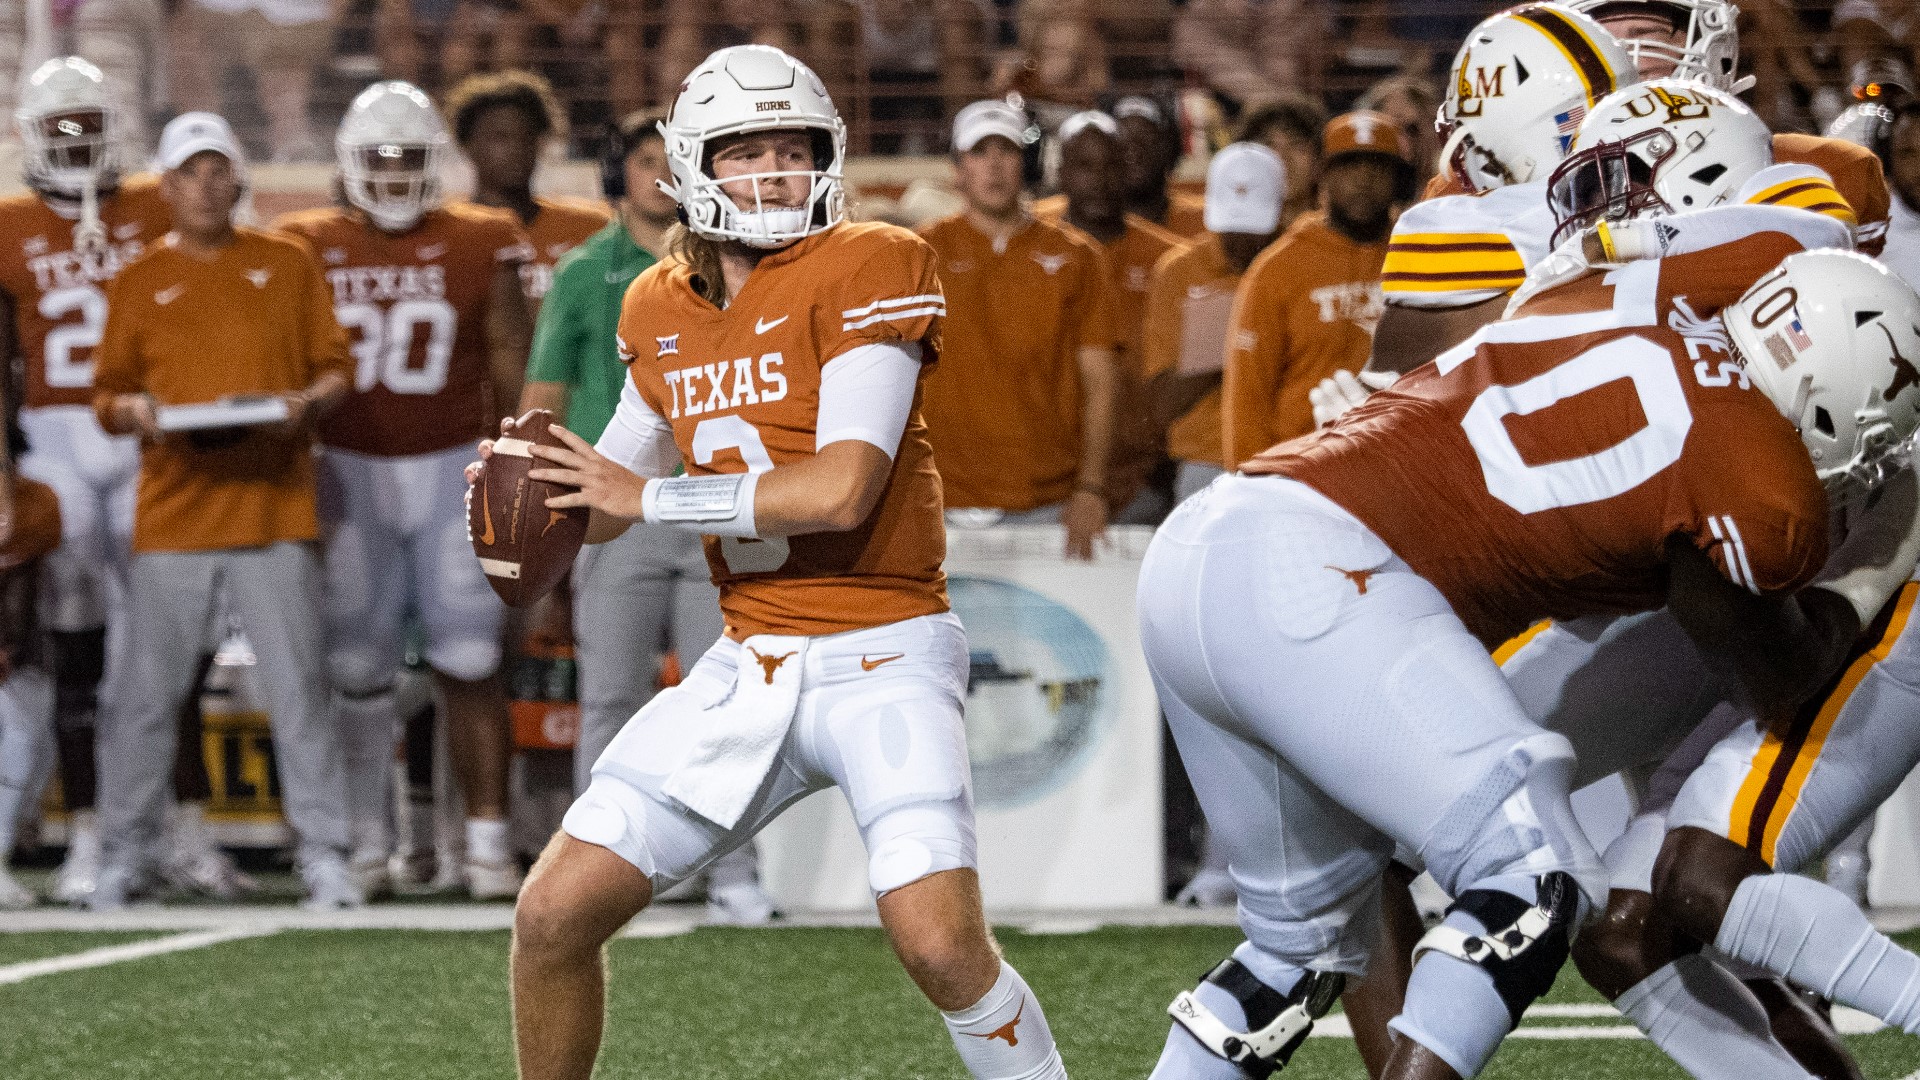 The win against an overmatched opponent was still a much-needed one for second-year coach Steve Sarkisian after the Longhorns went 5-7 in 2021.